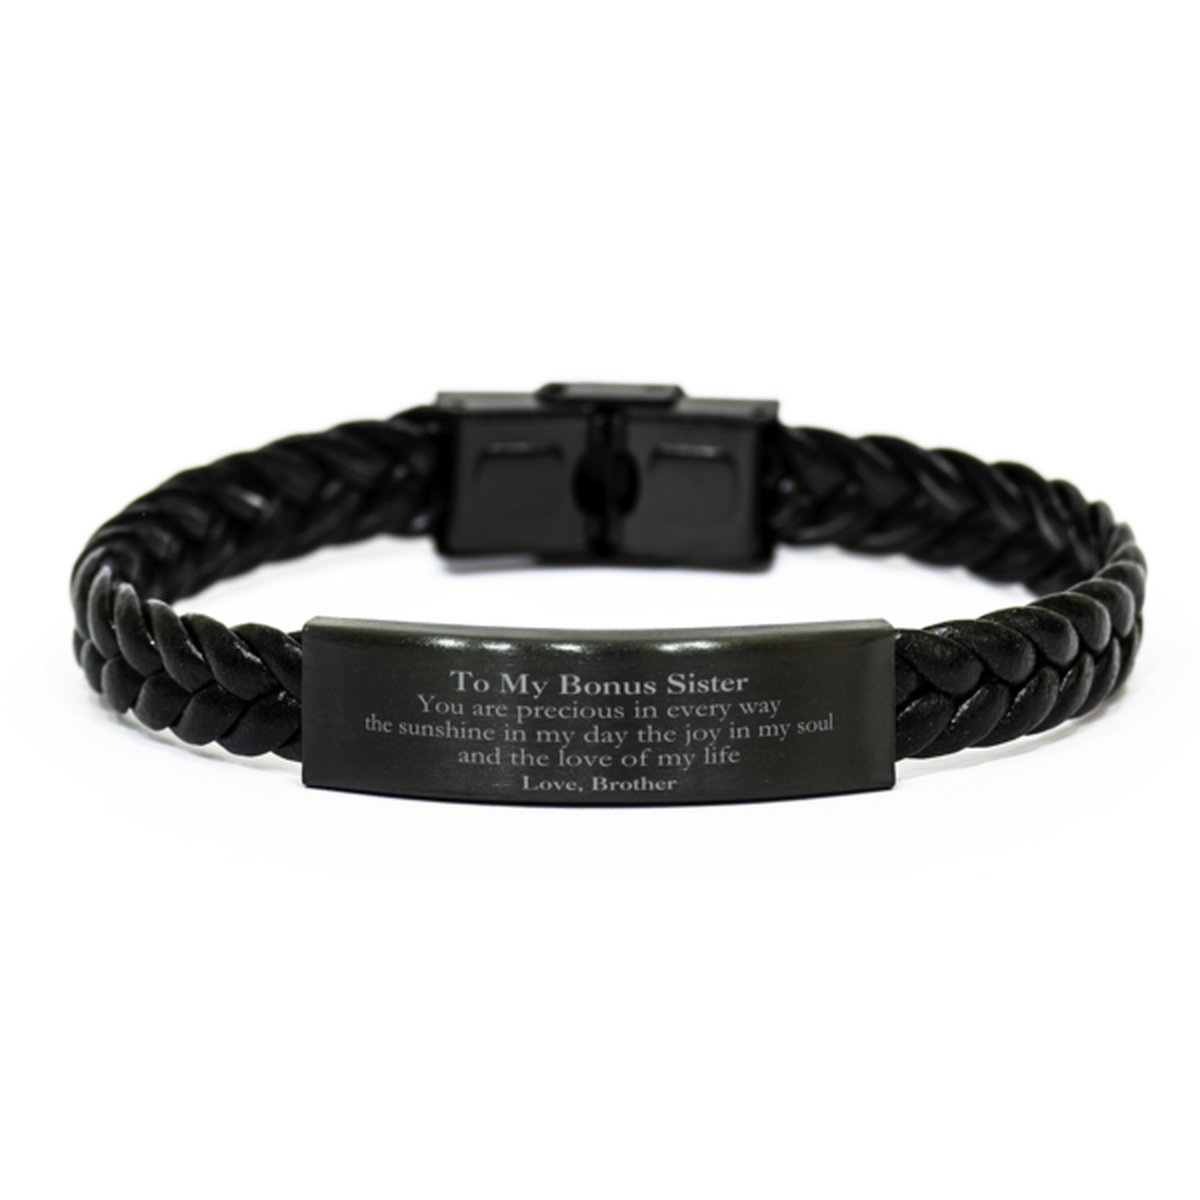 Graduation Gifts for Bonus Sister Braided Leather Bracelet Present from Brother, Christmas Bonus Sister Birthday Gifts Bonus Sister You are precious in every way the sunshine in my day. Love, Brother